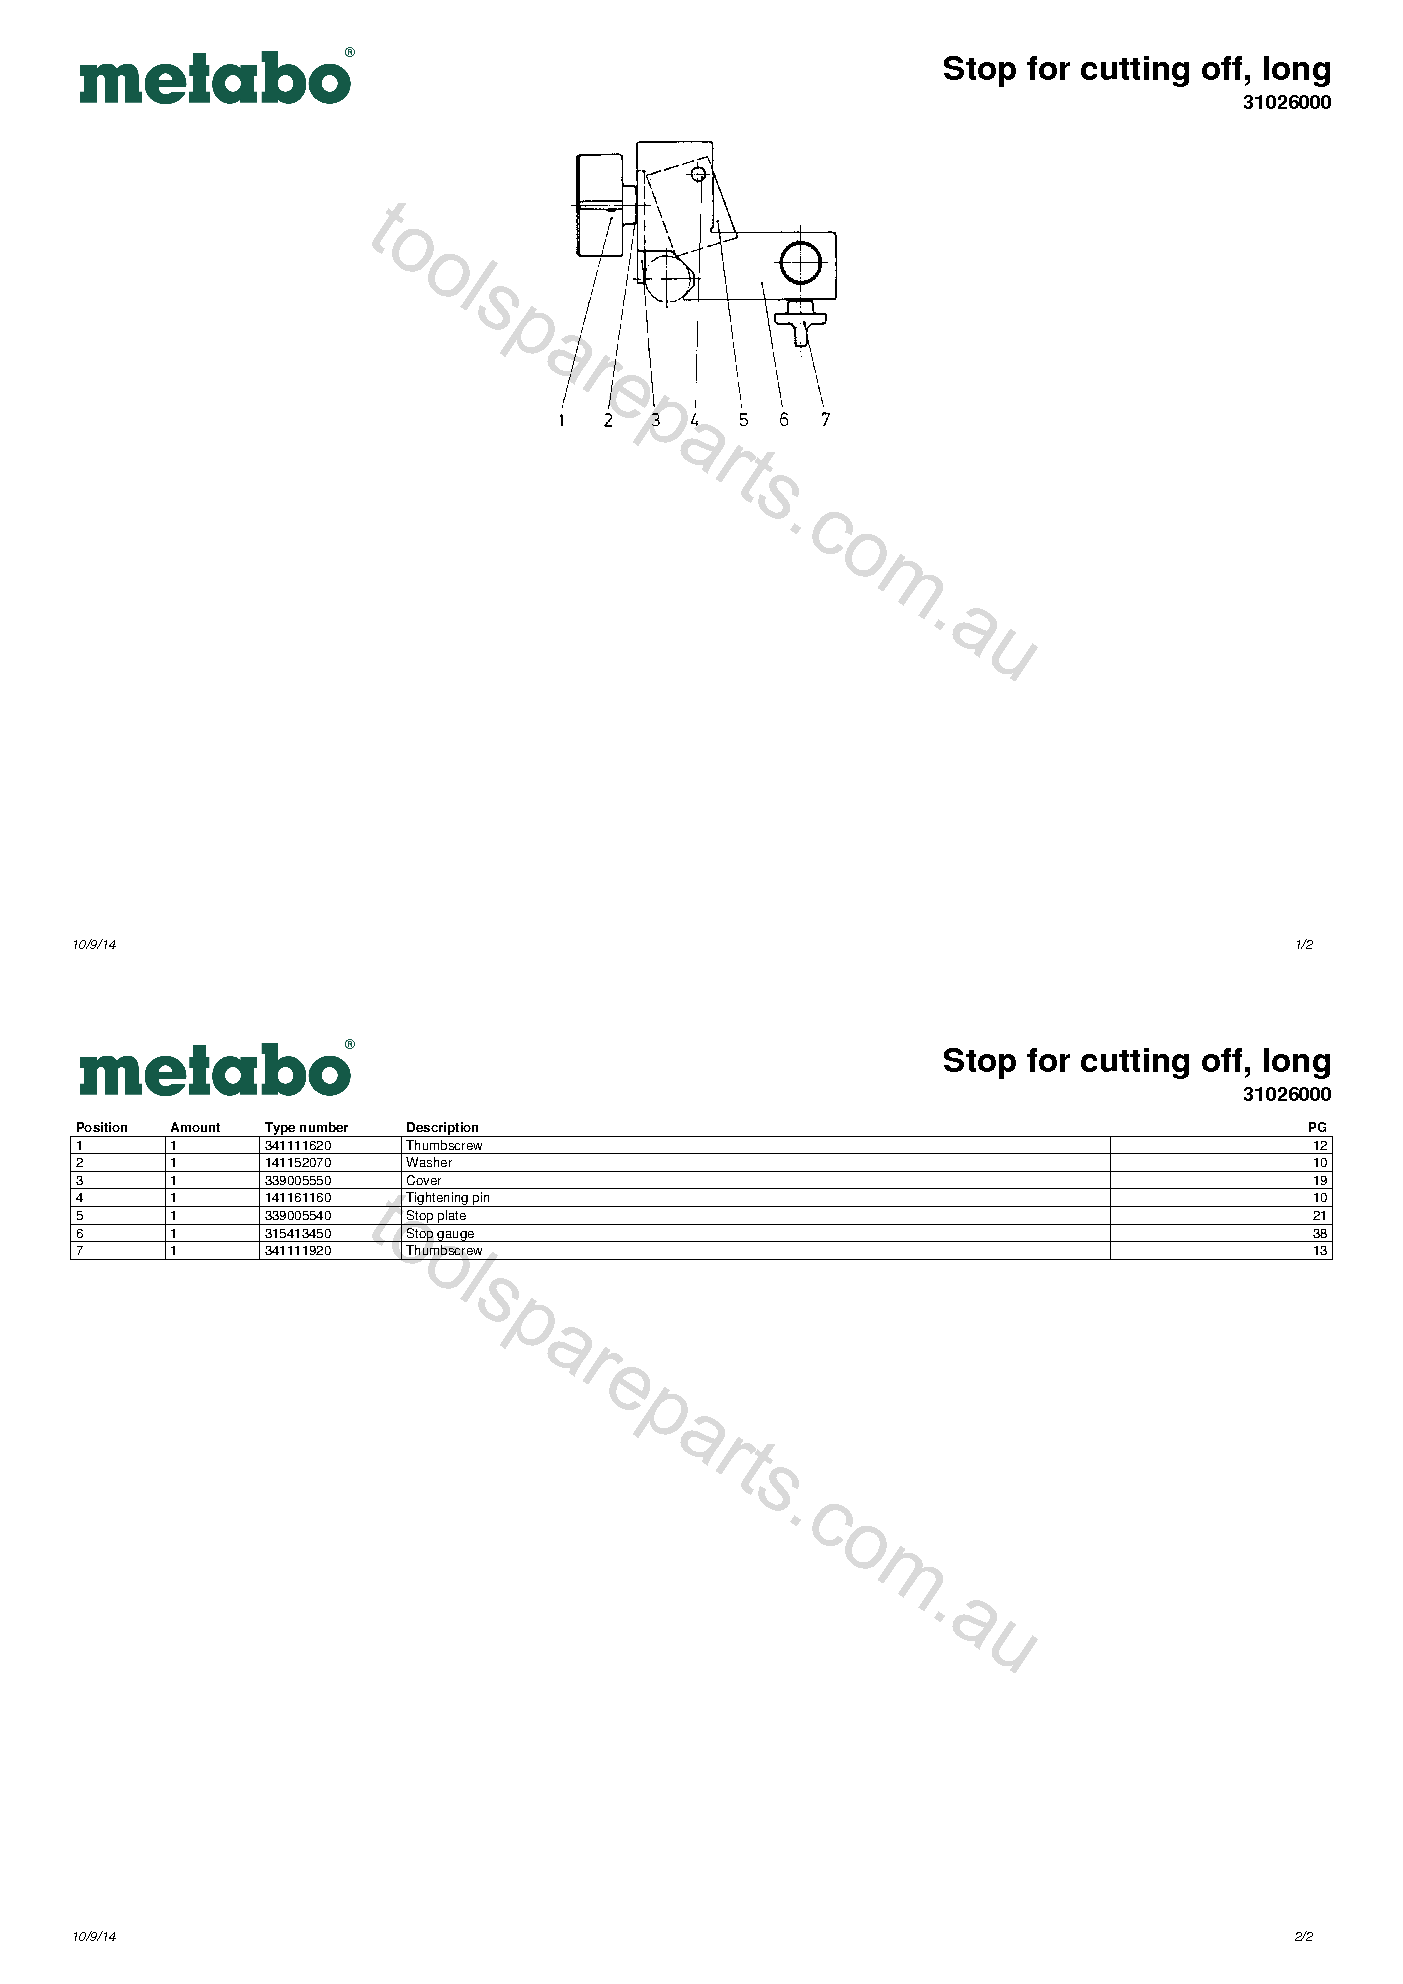 Metabo Stop for cutting off, long 31026000  Diagram 1